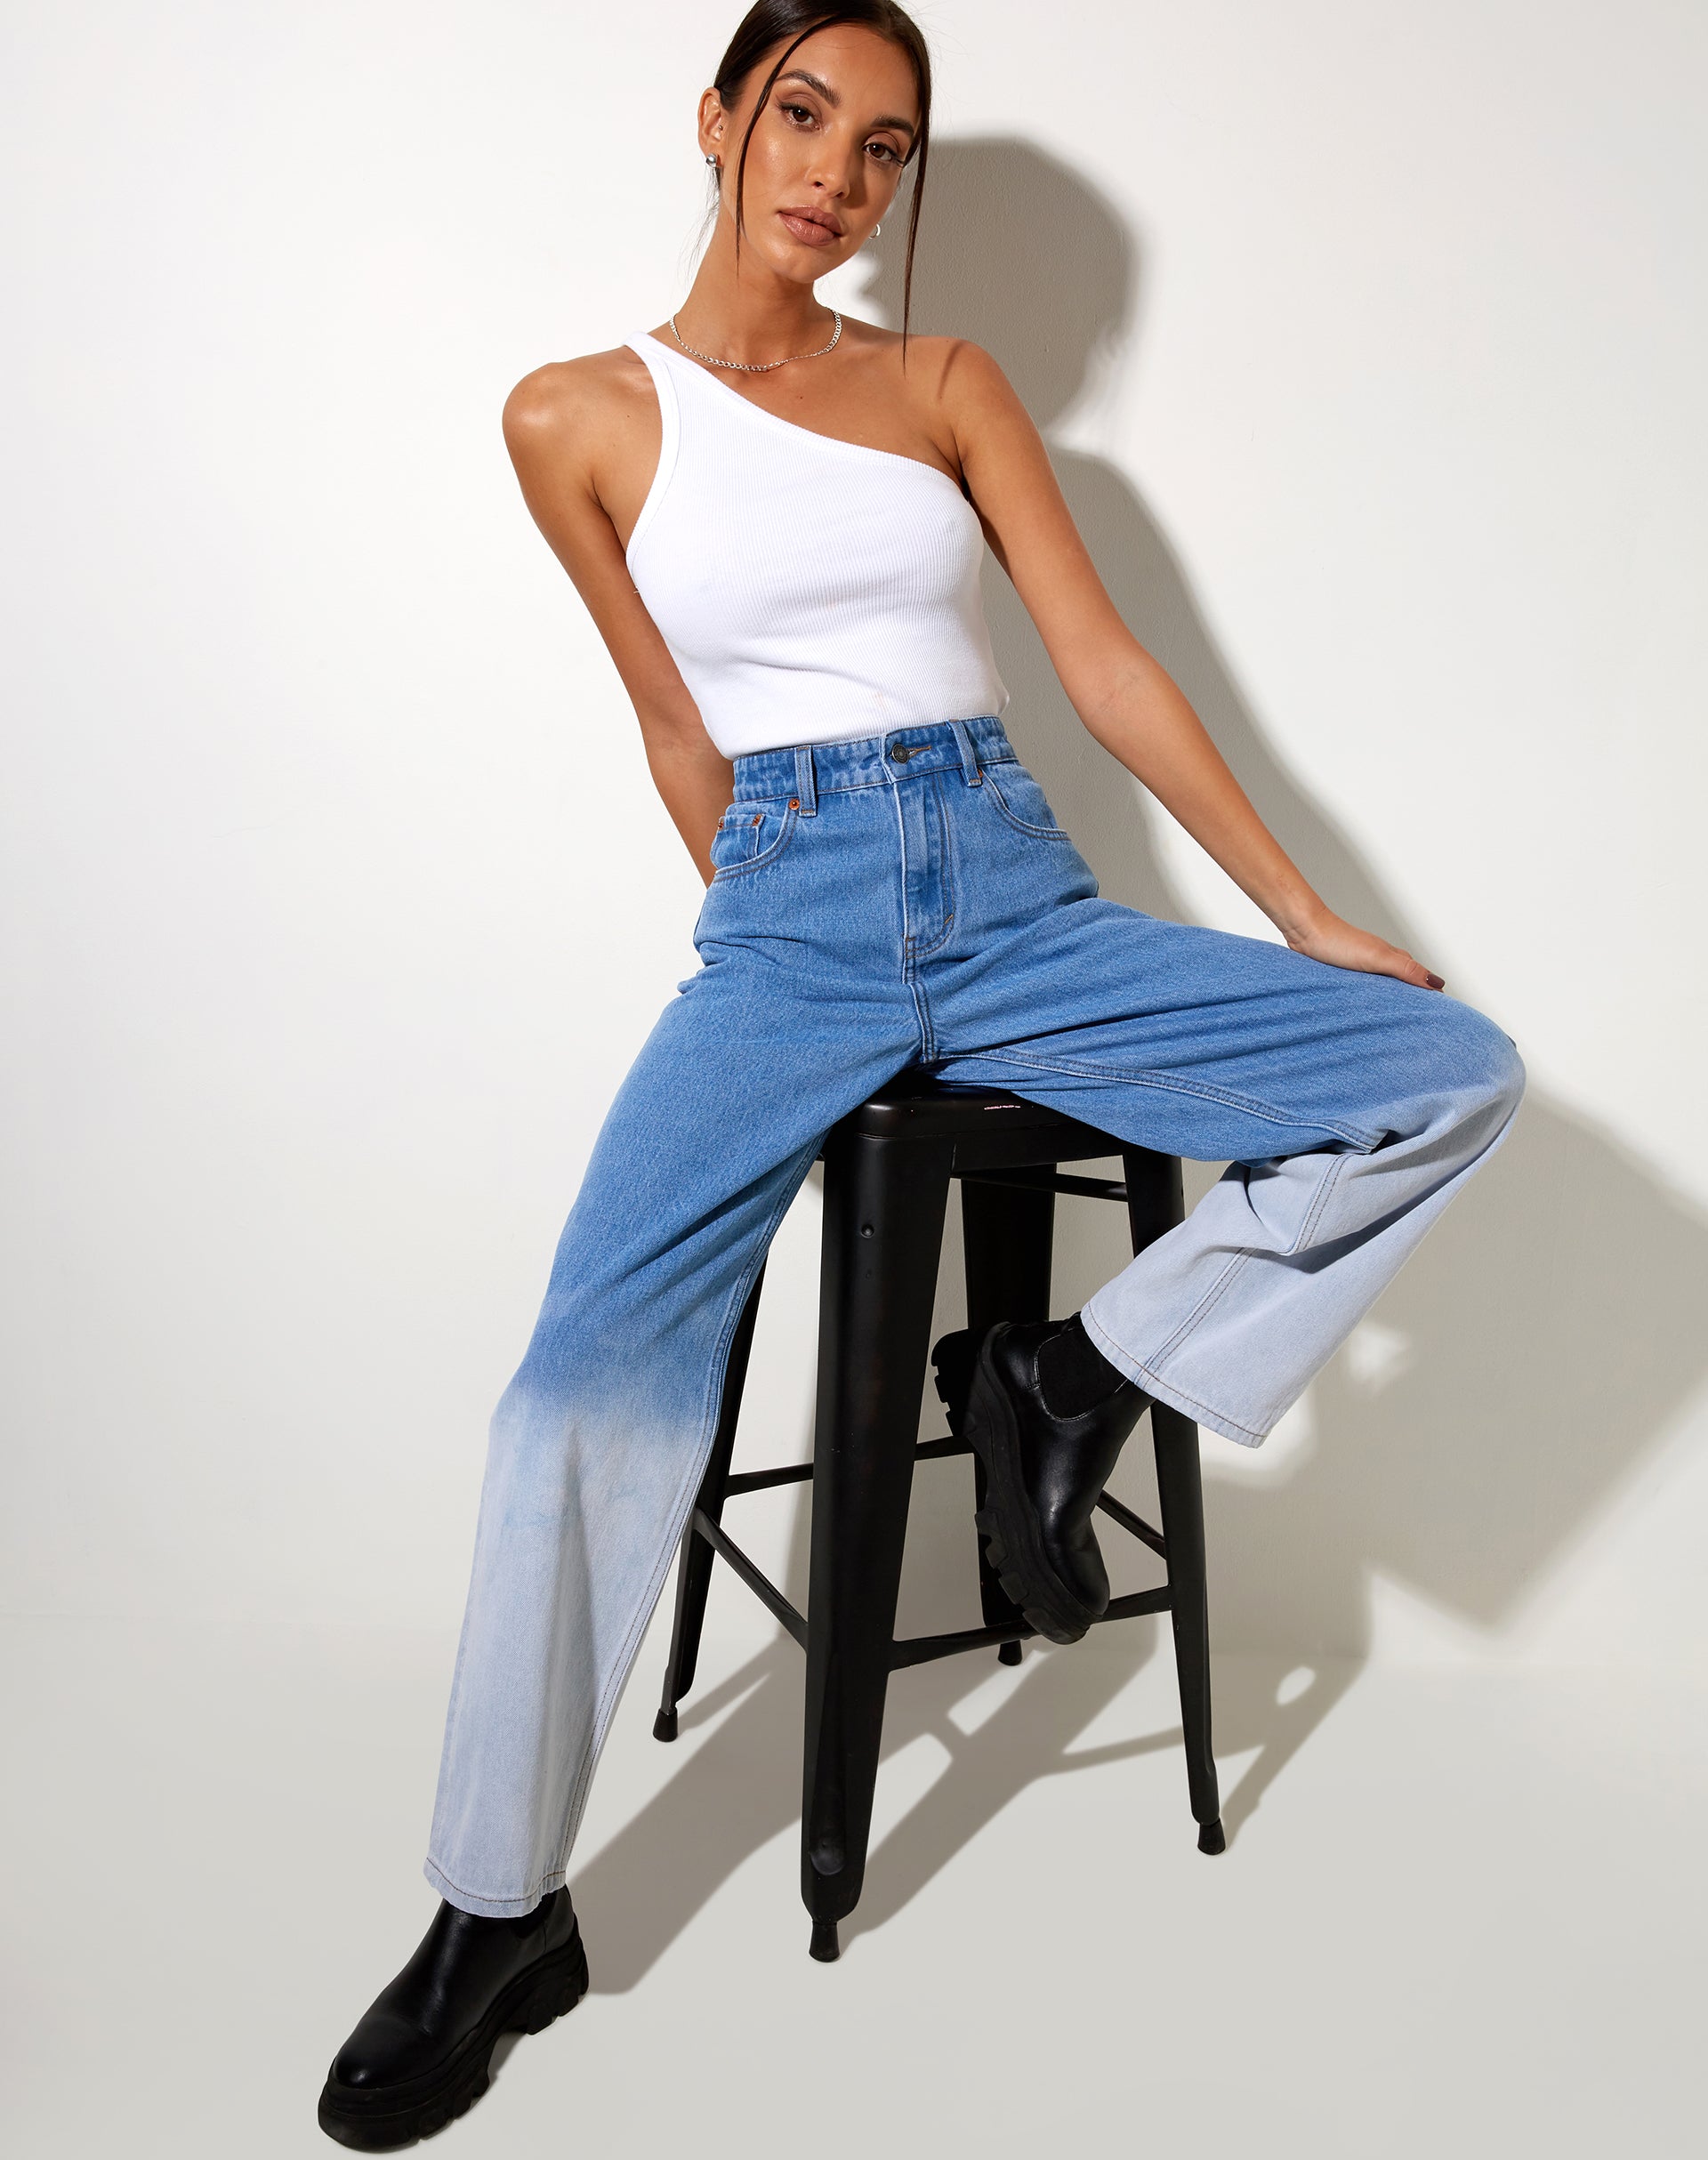 Image of Dip Bleach Parallel Jeans in Super Light Wash